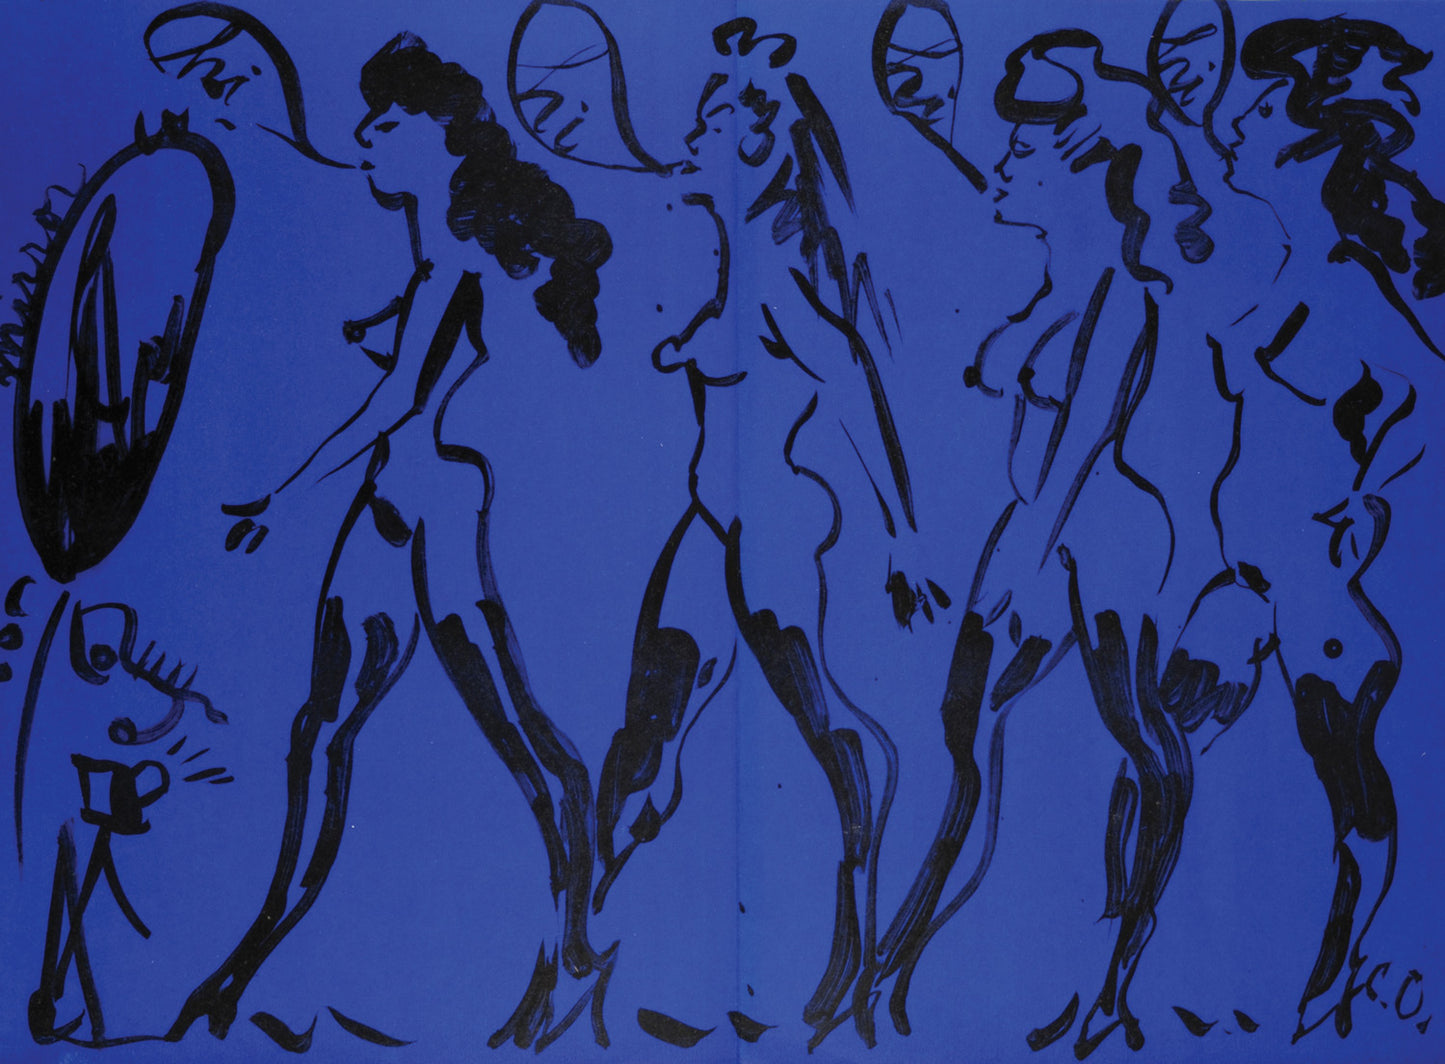 Untitled (Parade of Women)